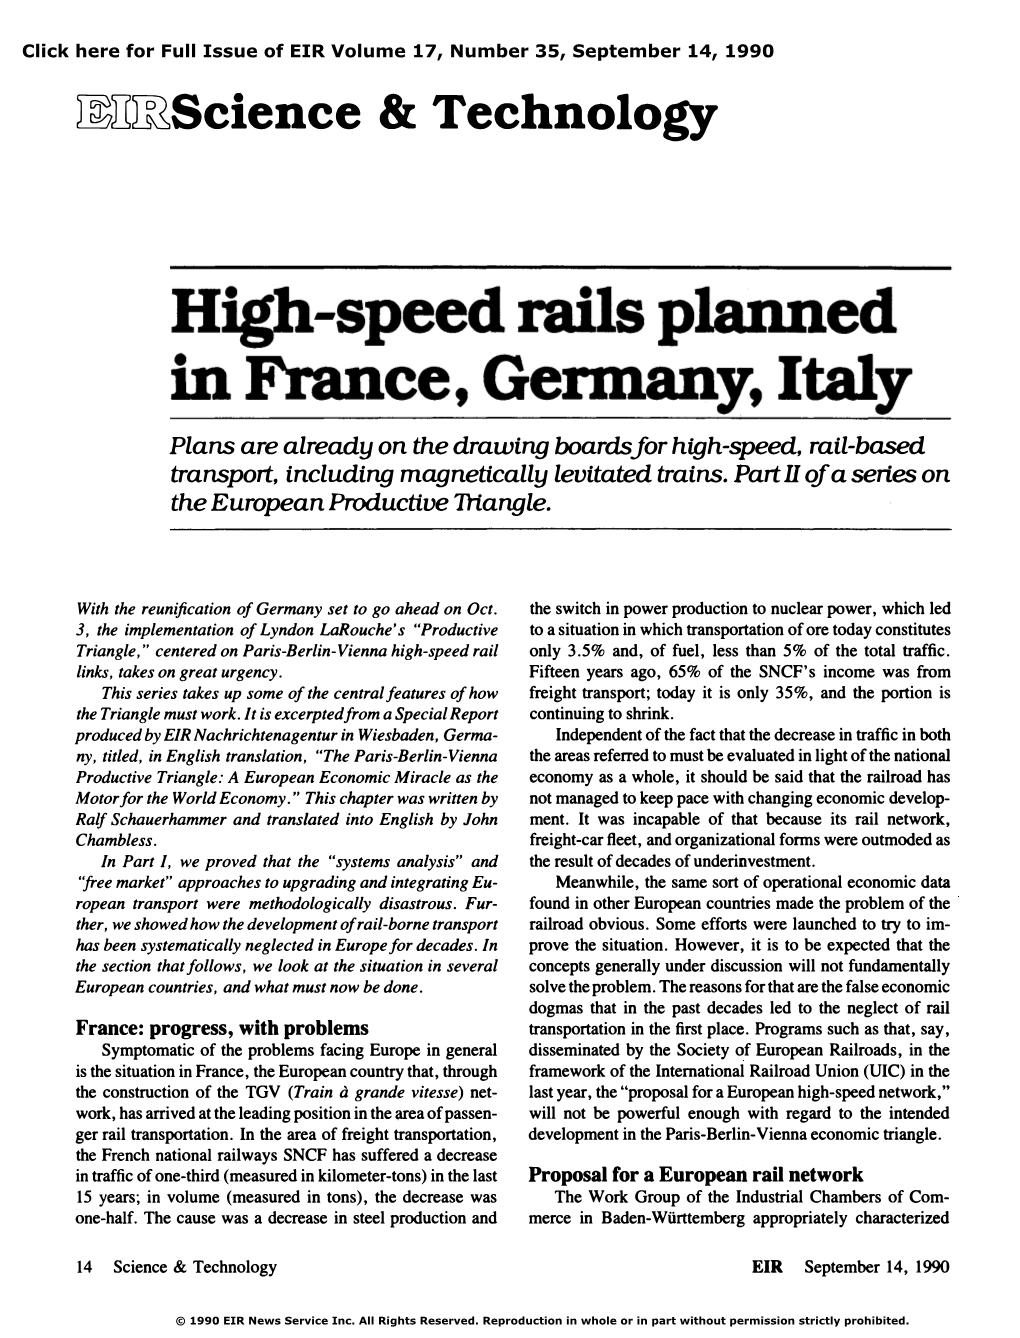 High-Speed Rails Planned in France, Germany, Italy